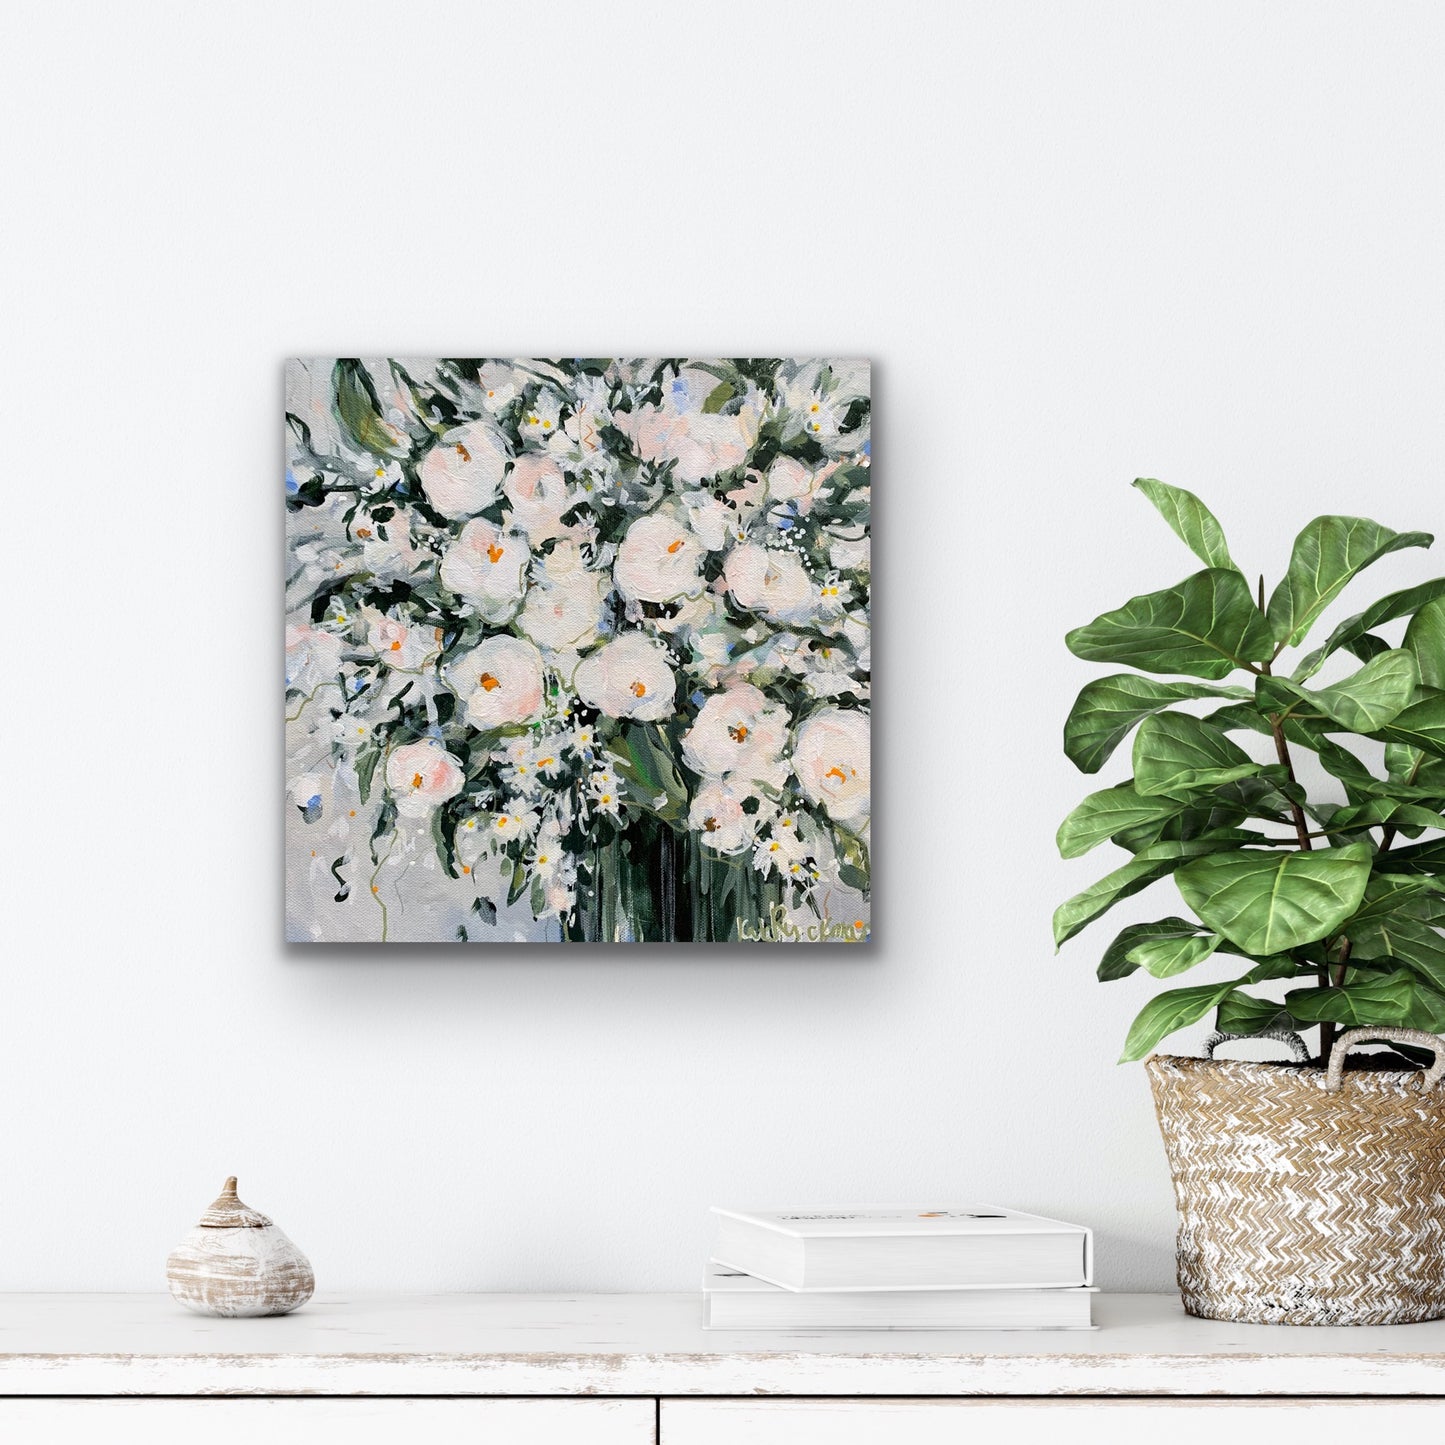 Santini Gallery | Blooms for You